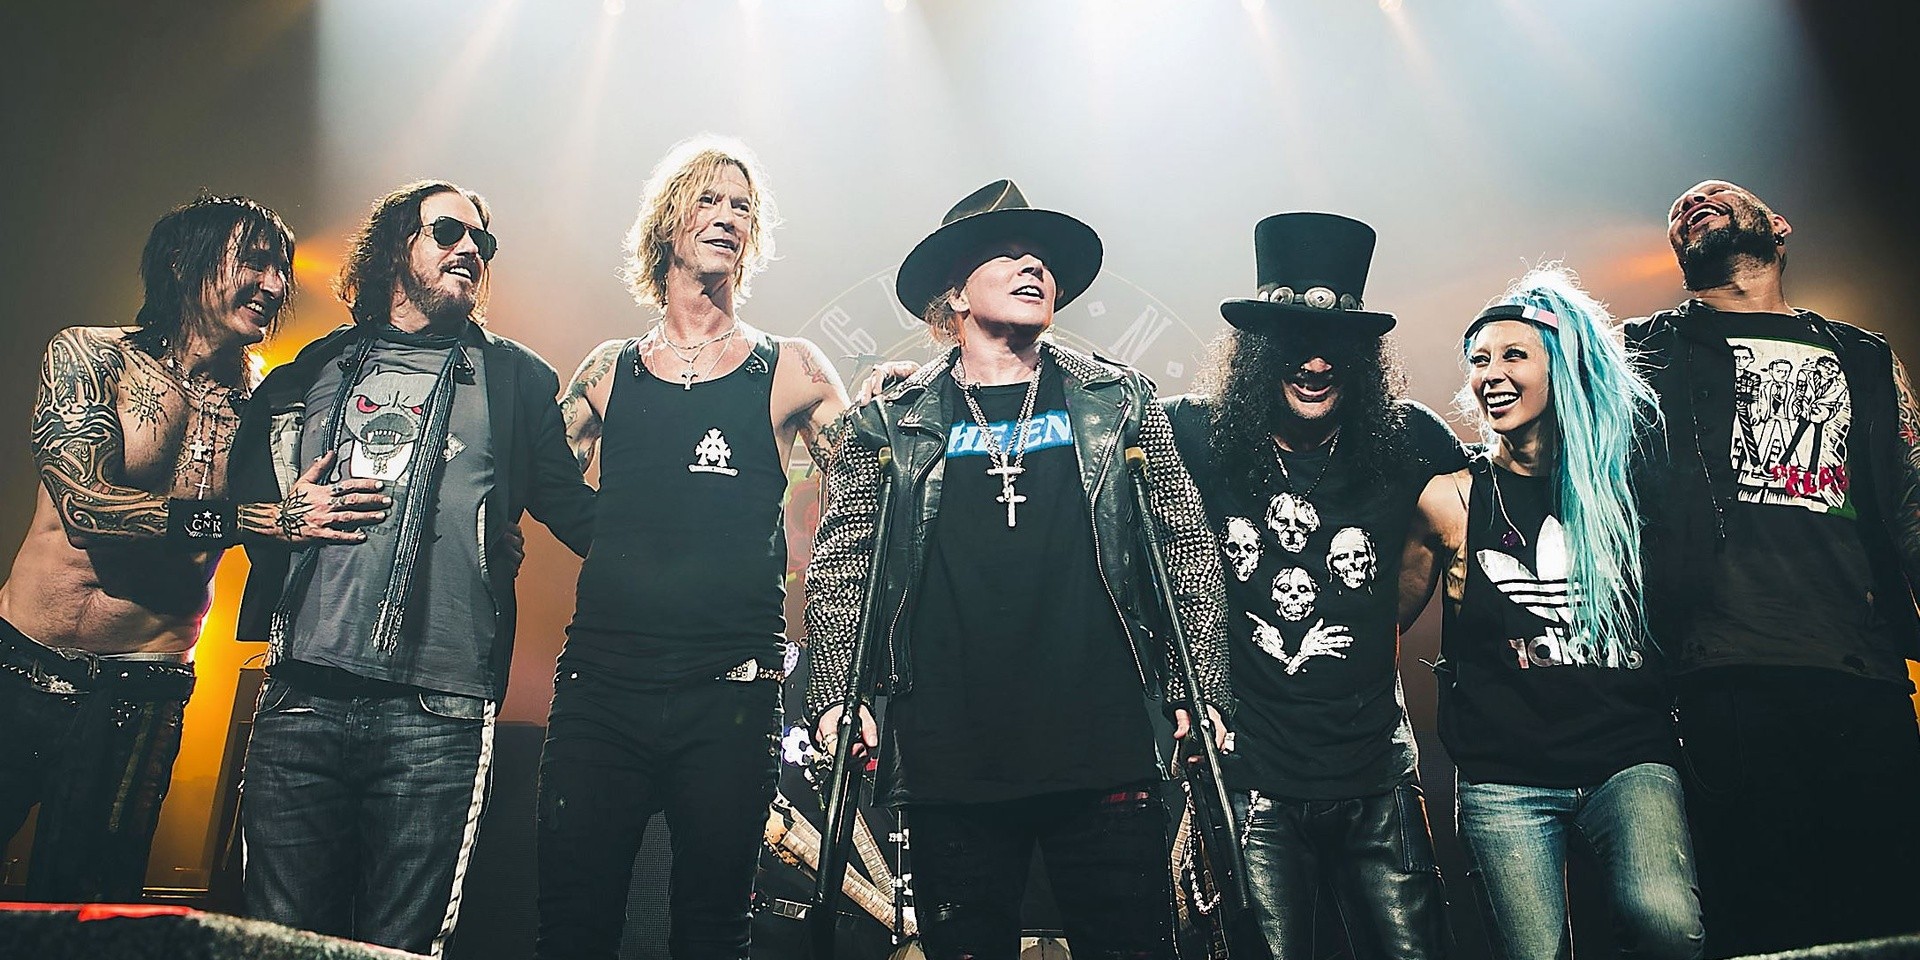 Here's what you can expect from the first show in Singapore by Guns N' Roses